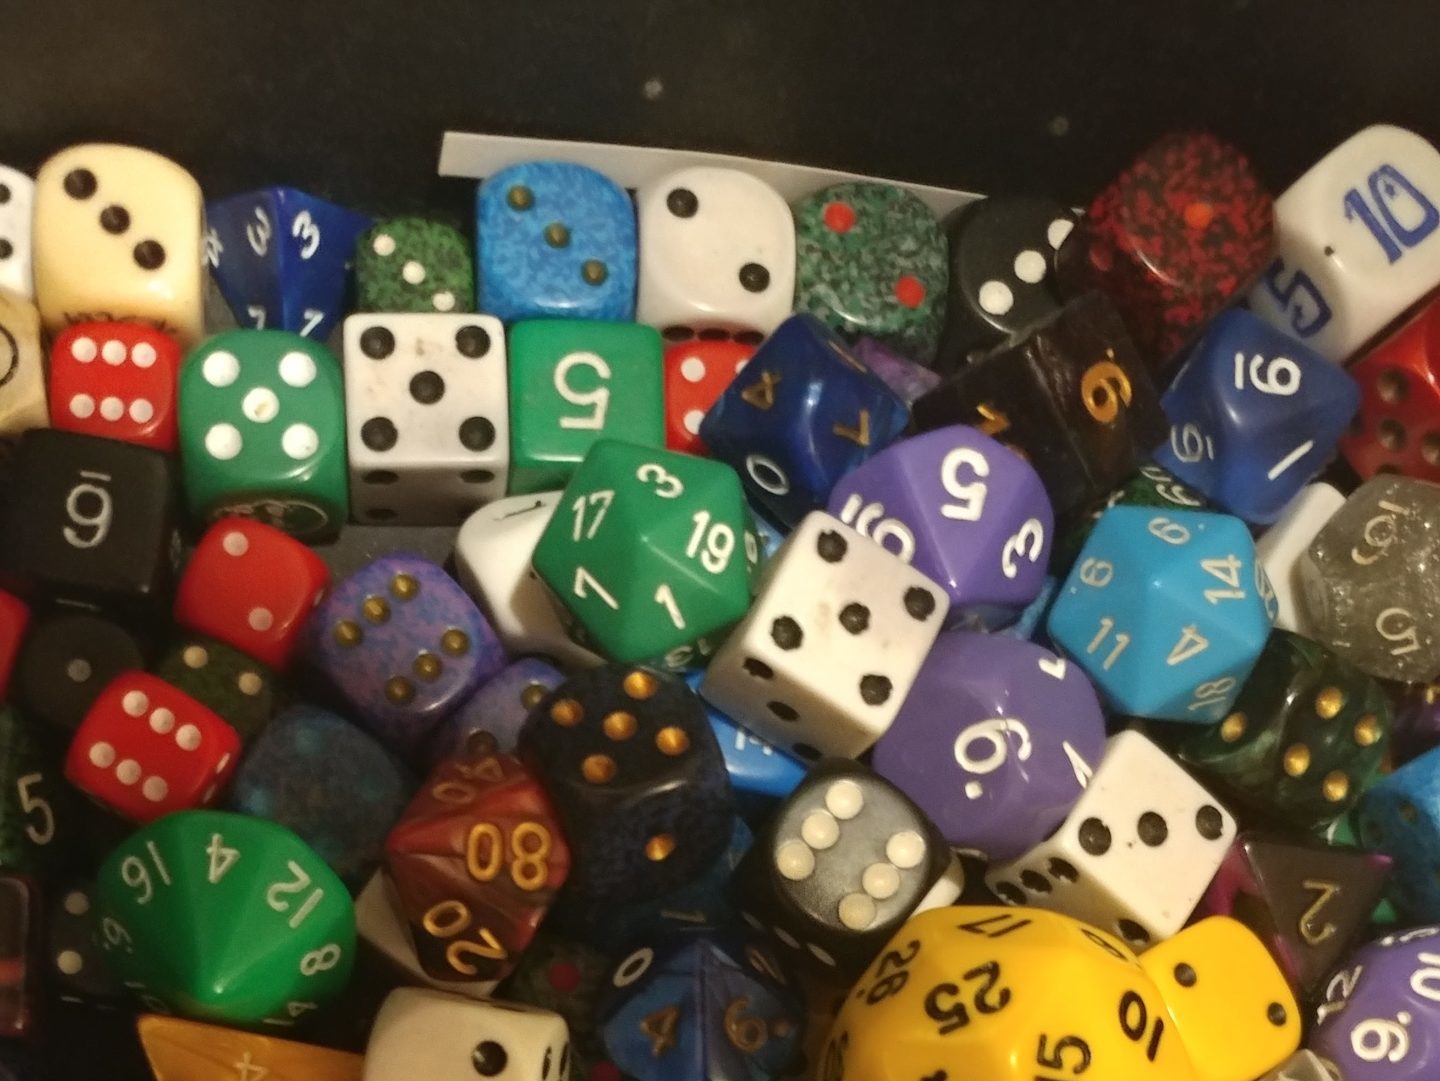 A large and varied pile of dice.